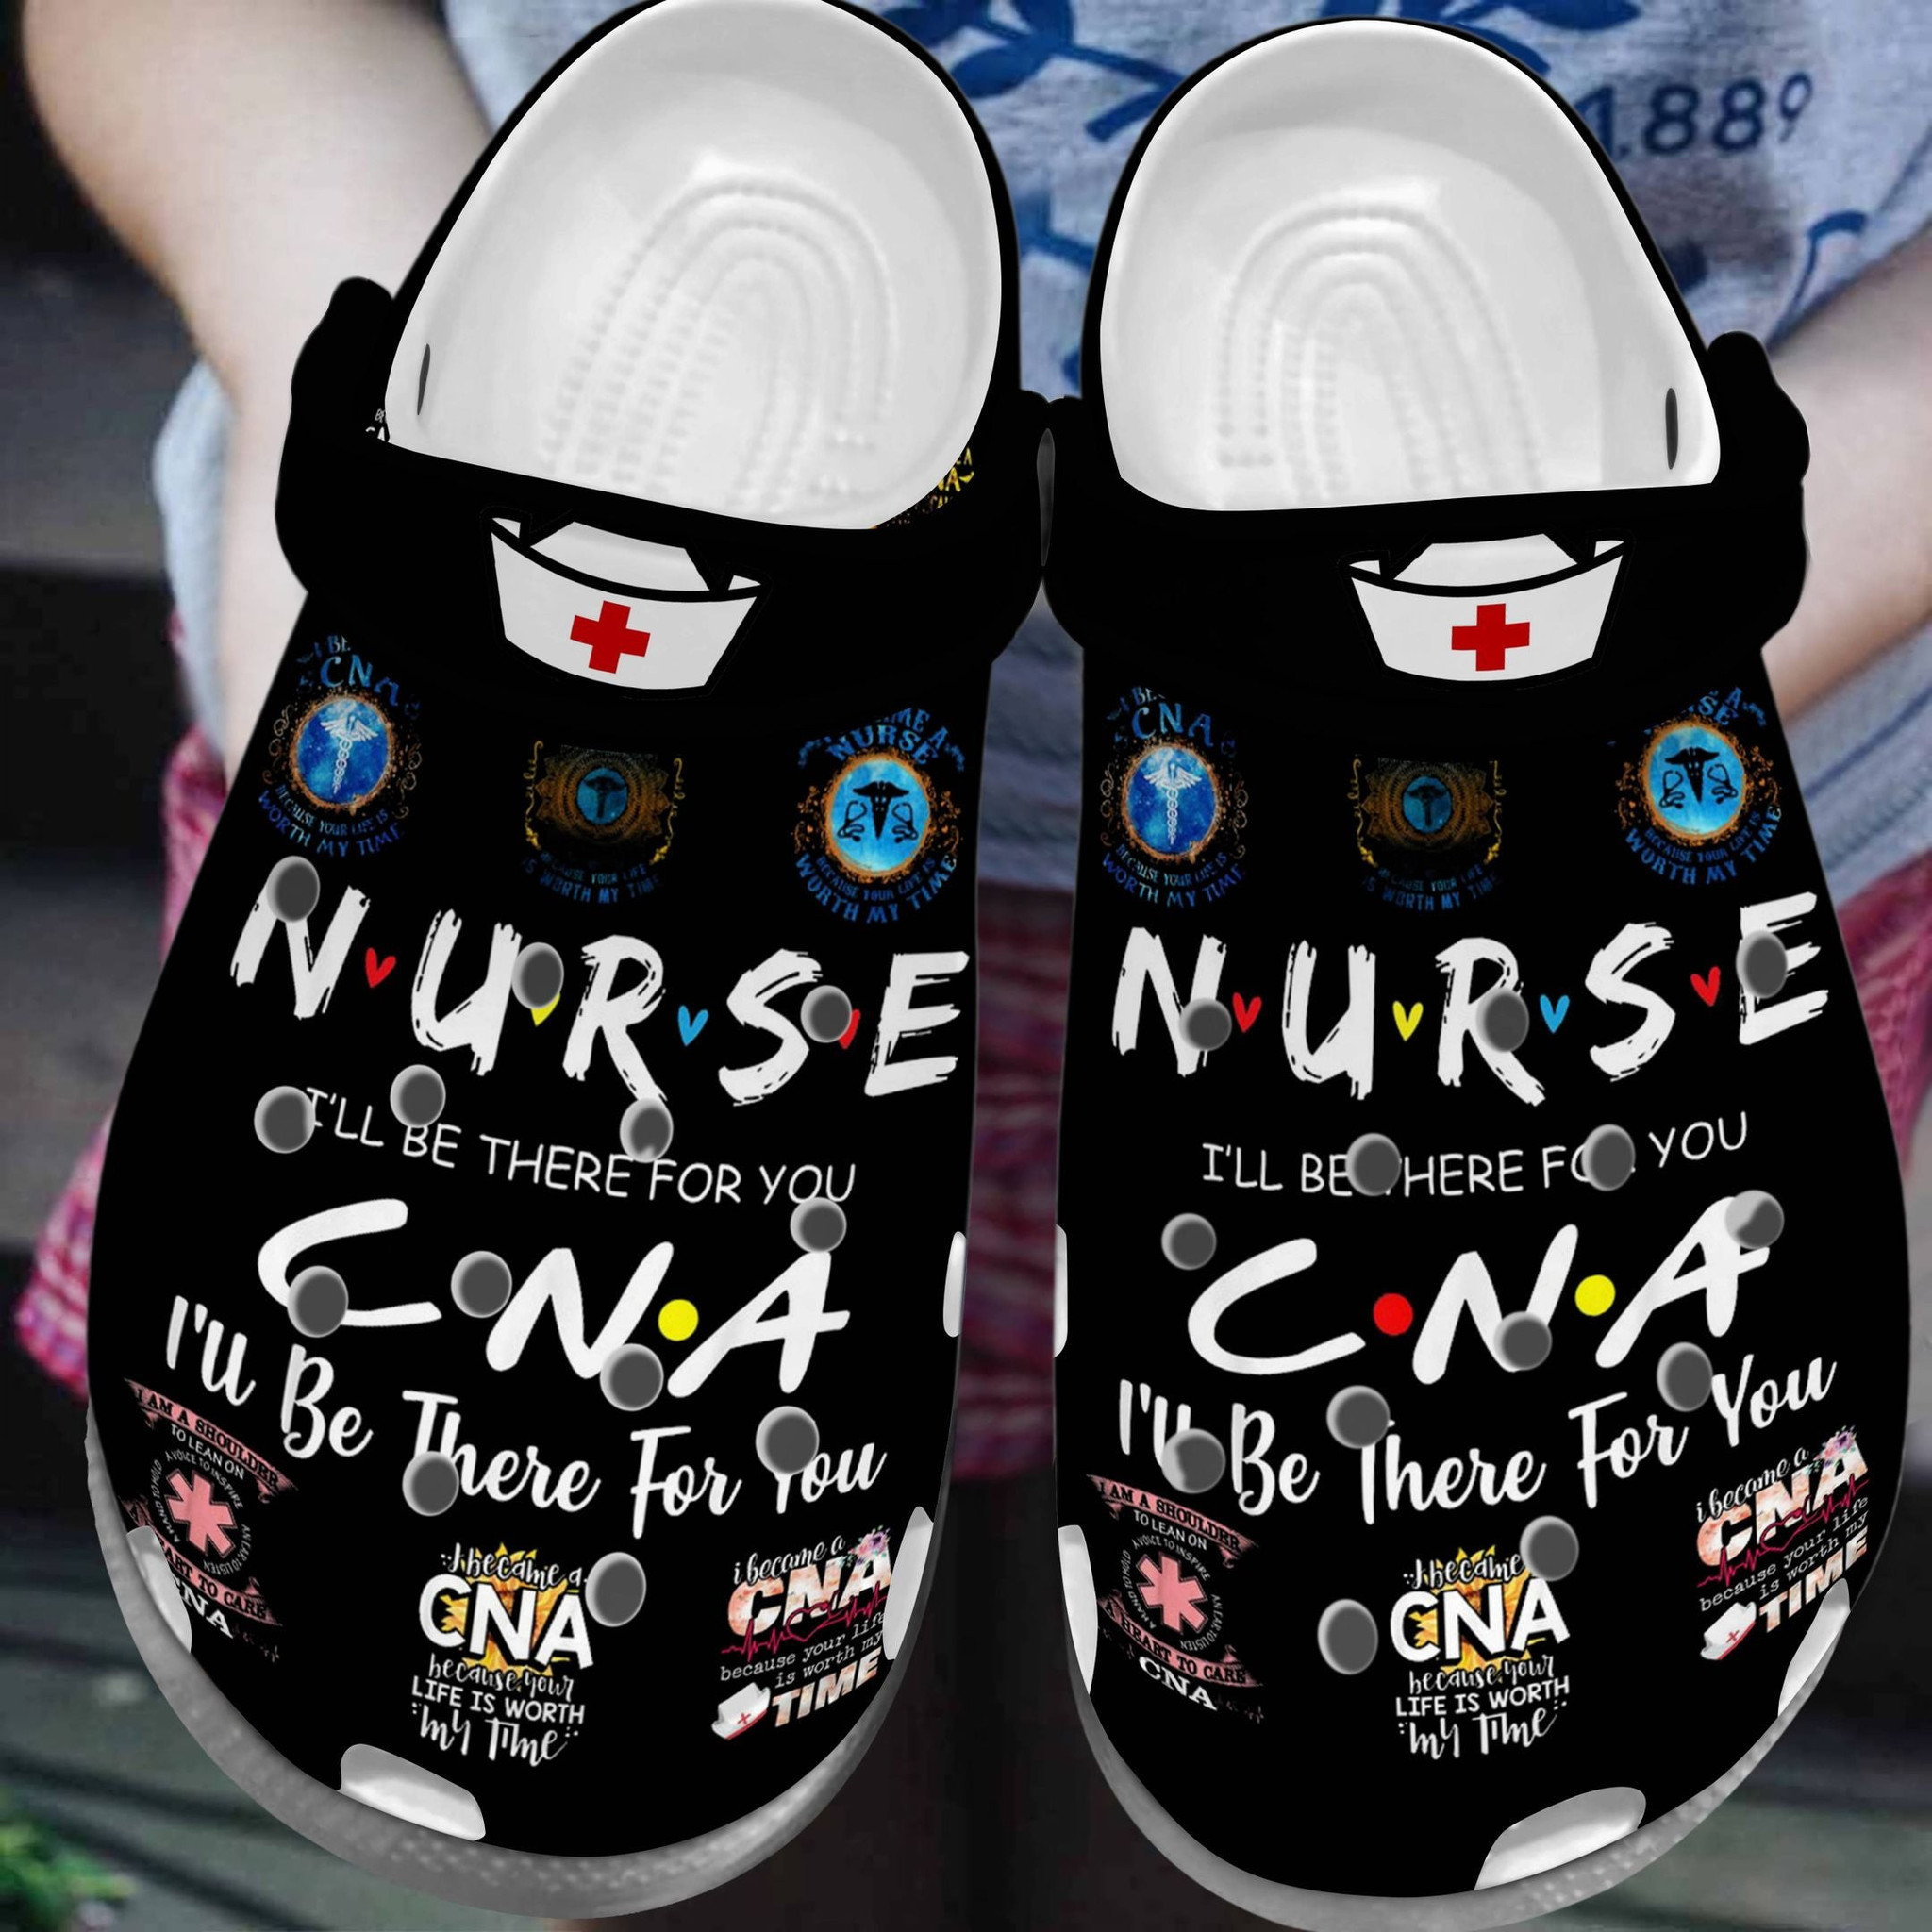 Ill Be There For You Cna Crocs Clog Shoes - Nurse Outdoor Crocs Clog Shoes Birthday Gift For Women Men